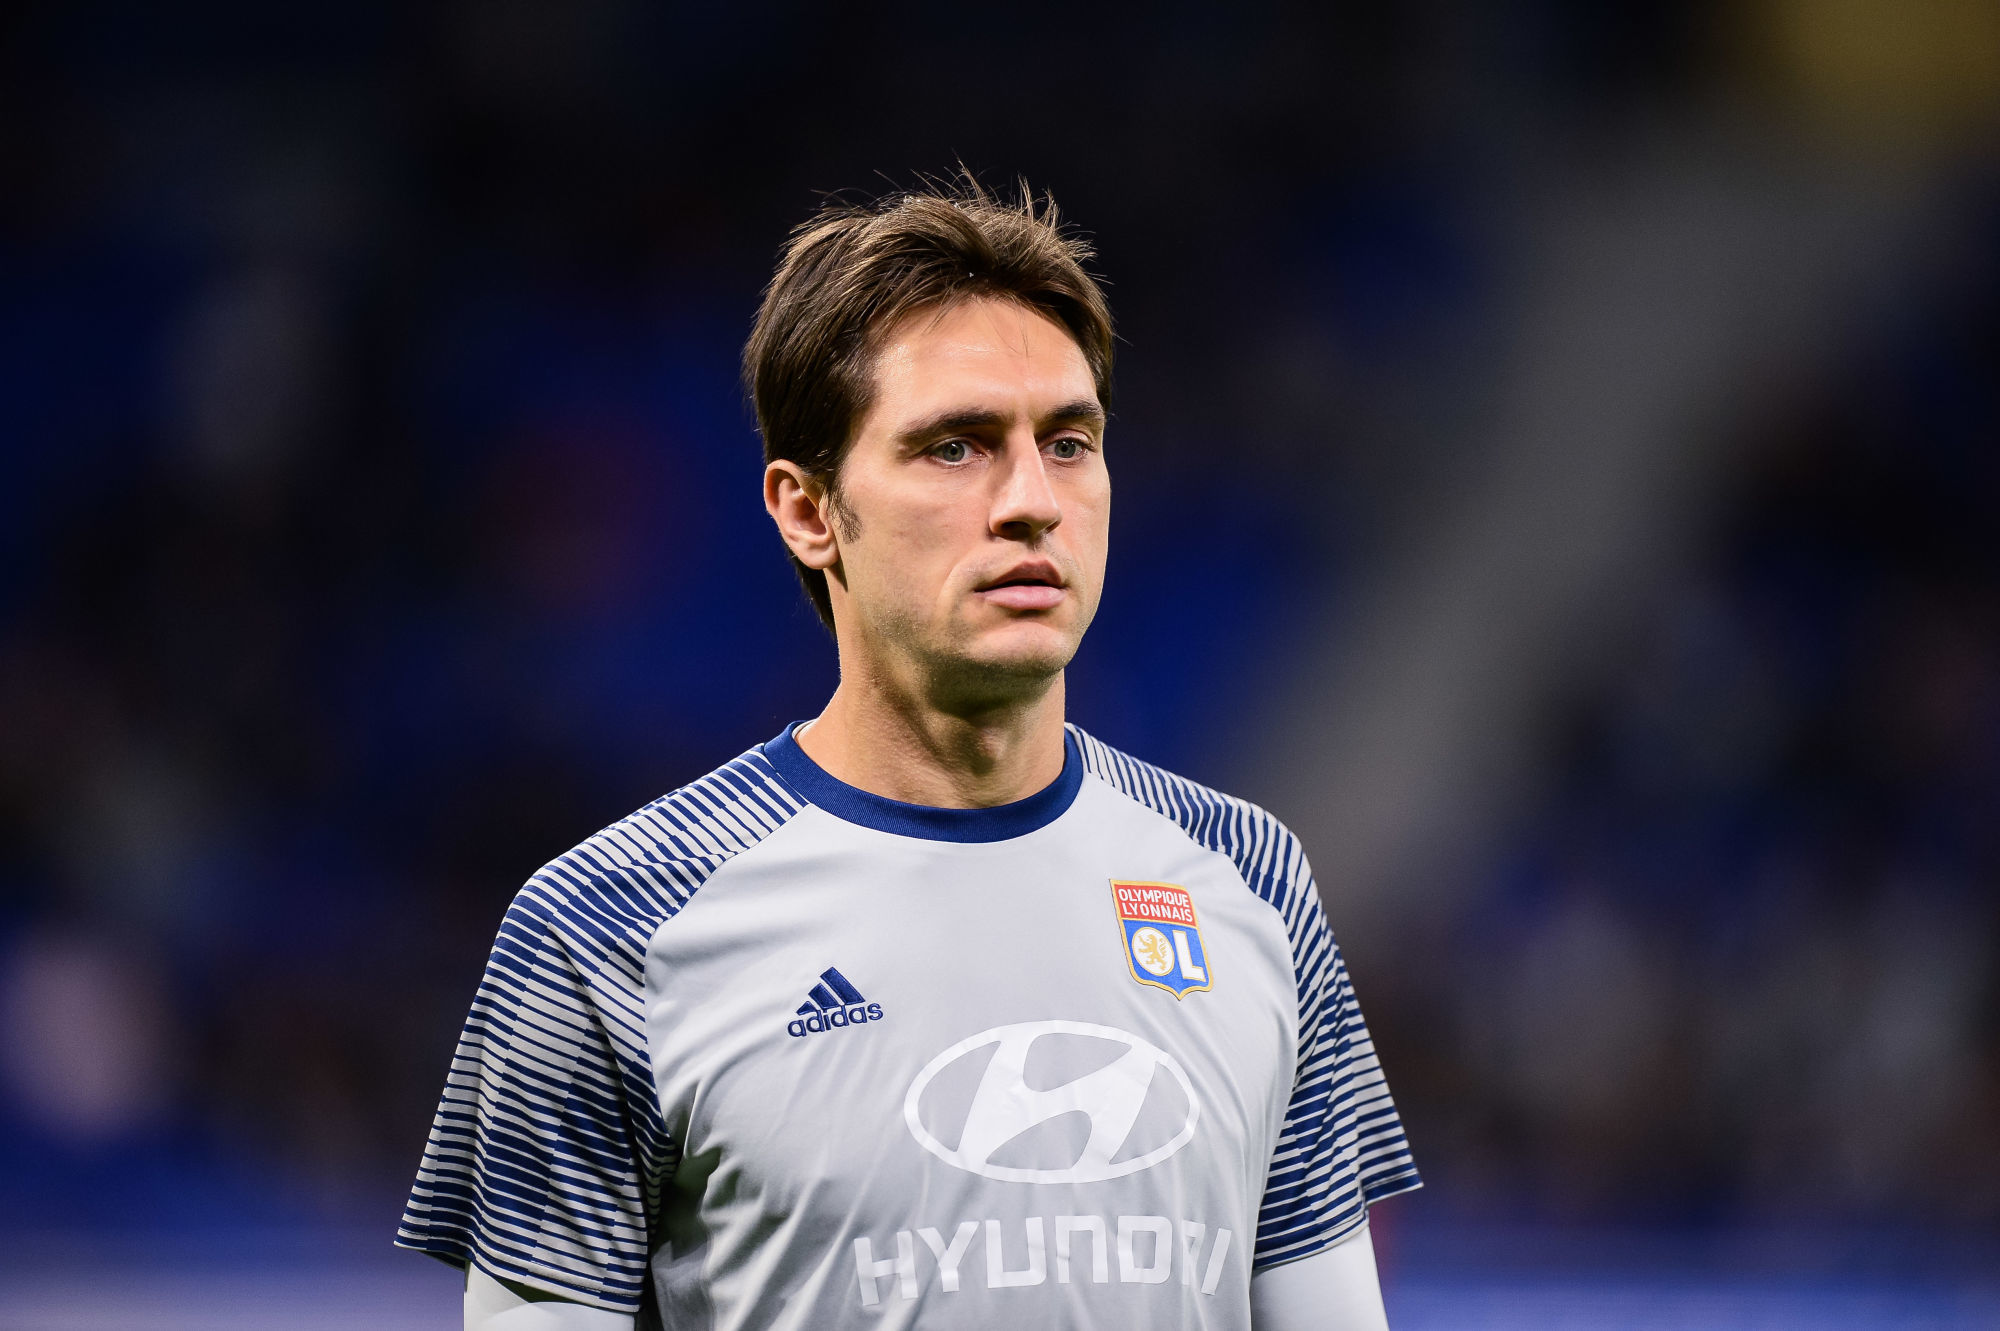 Ciprian TATARUSANU of Lyon before the French Ligue 1 football match between Lyon and Metz at Groupama Stadium on October 26, 2019 in Lyon, France. (Photo by Baptiste Fernandez/Icon Sport) - Ciprian TATARUSANU - Groupama Stadium - Lyon (France)